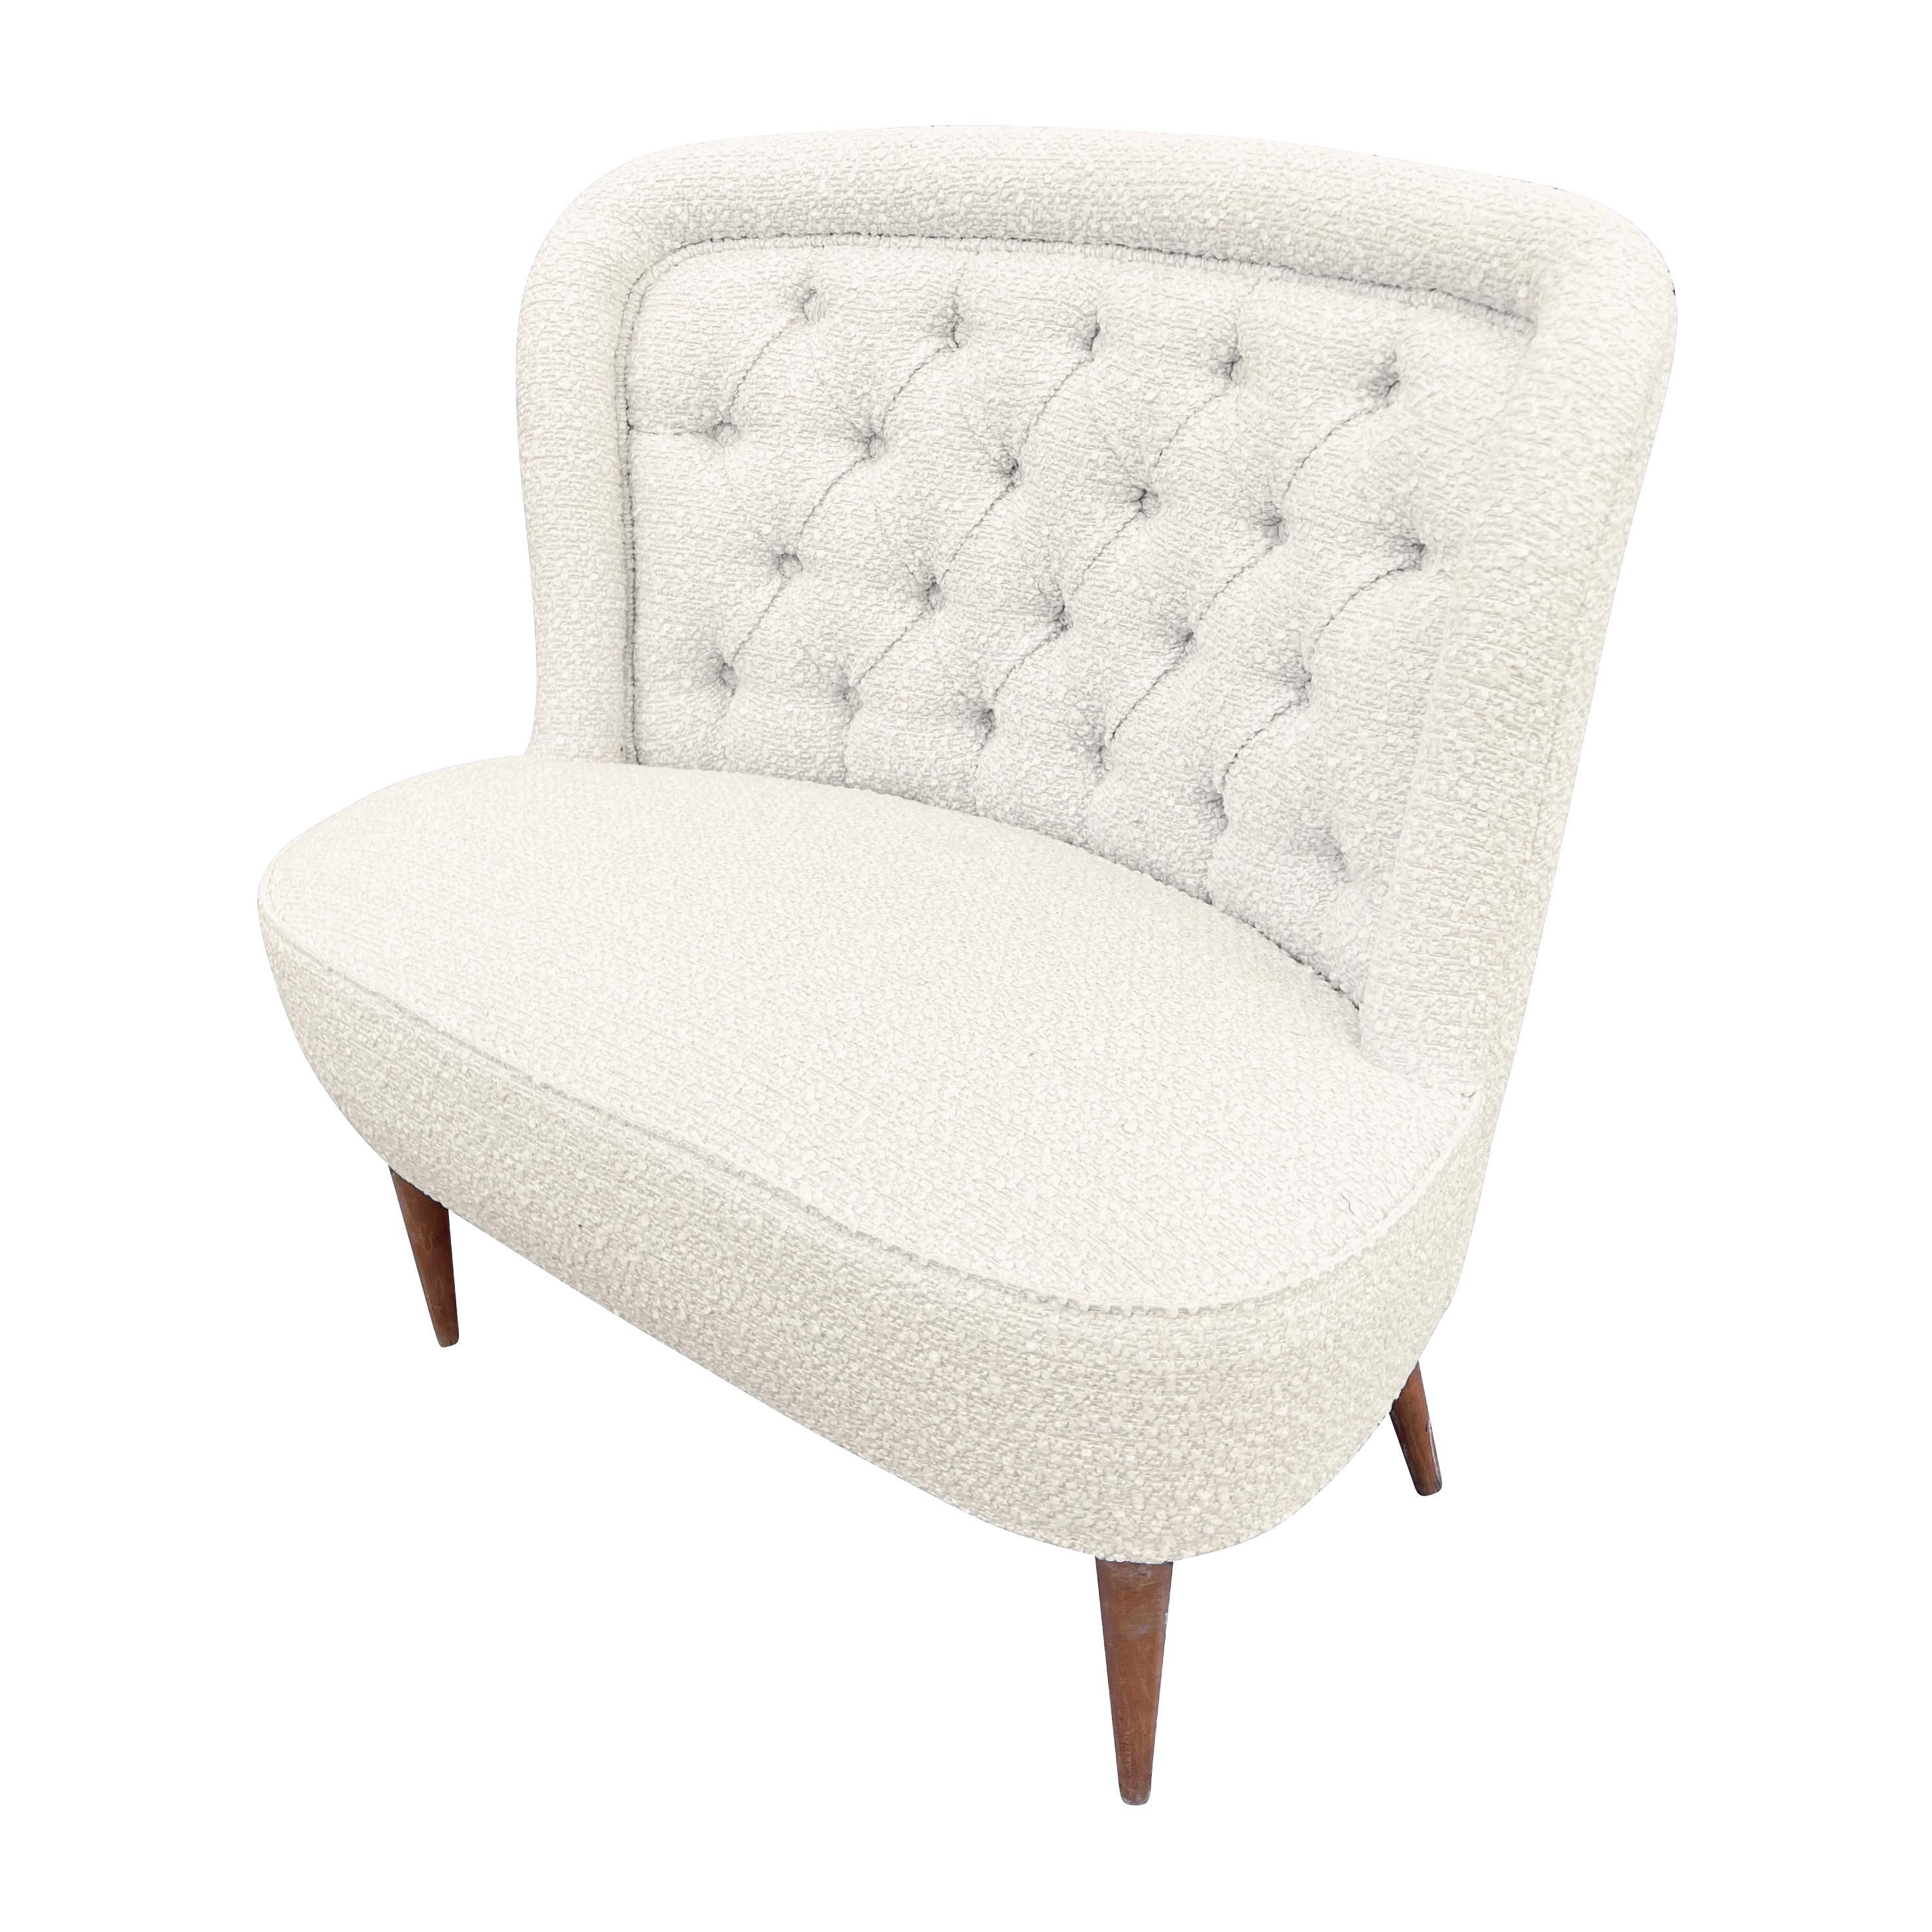 Italian midcentury slipper chair
$2,900.00
Italian midcentury slipper chair with a tufted back and wood legs. Recovered in an off-white bouclé.

Condition: Minor wear consistent with age and use. Recently recovered.

Measures: width: